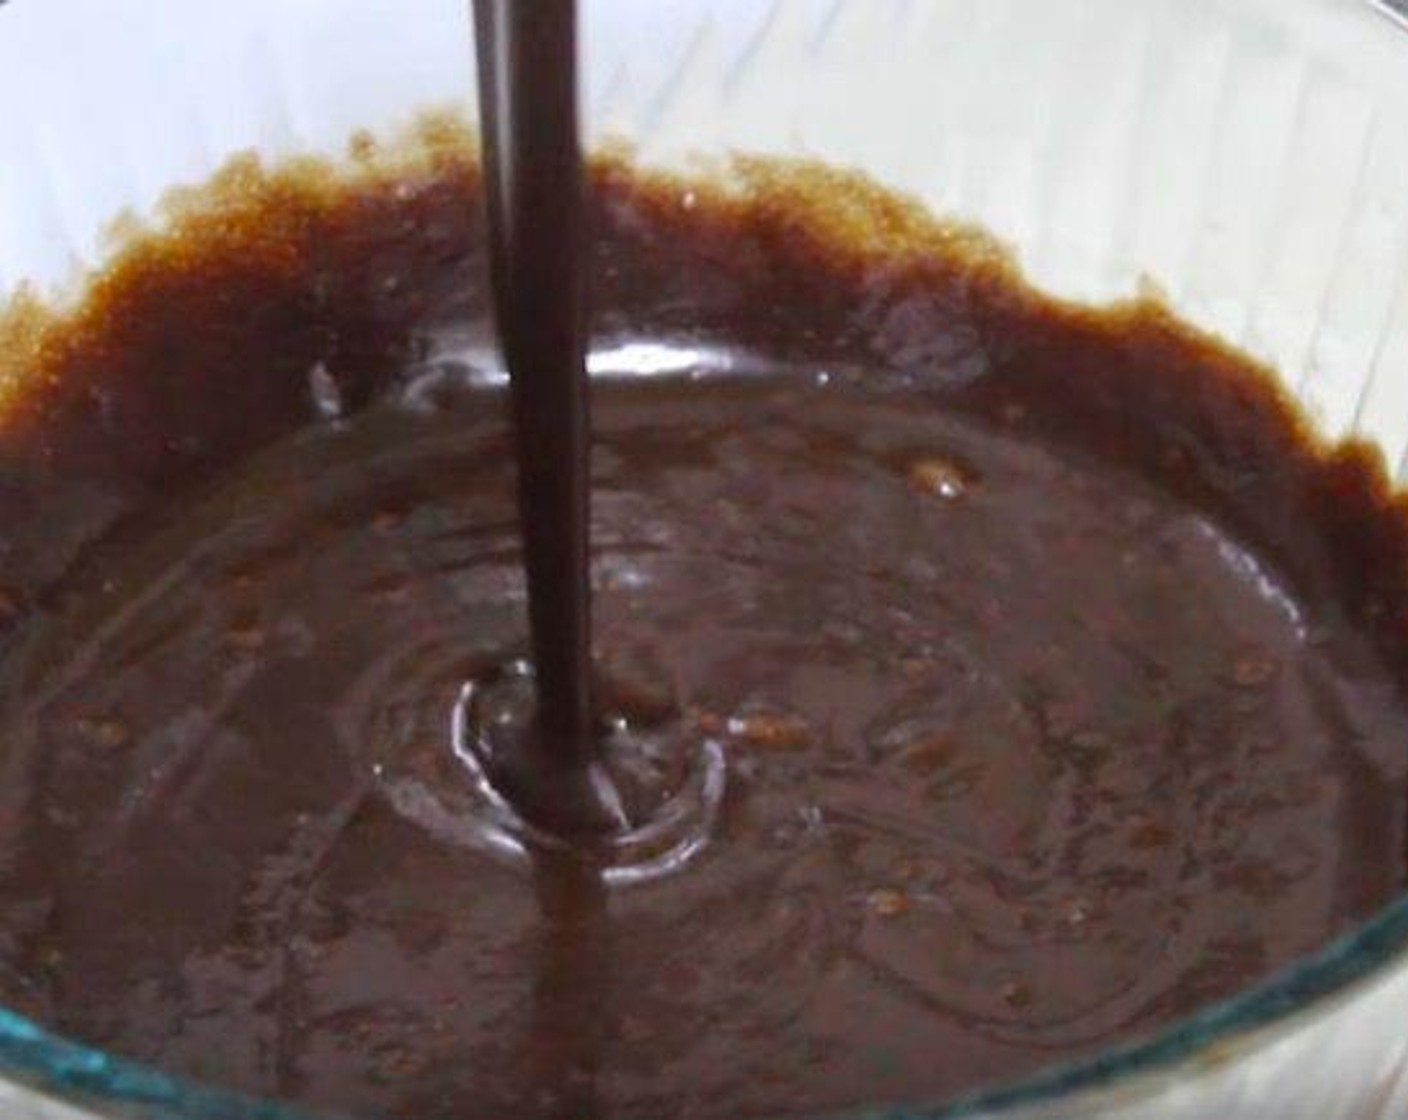 step 2 In a mixing jug, add Eggs (2) and Vanilla Extract (1 tsp). Whisk to combine. Add egg mixture to the chocolate mixture and whisk again until smooth.